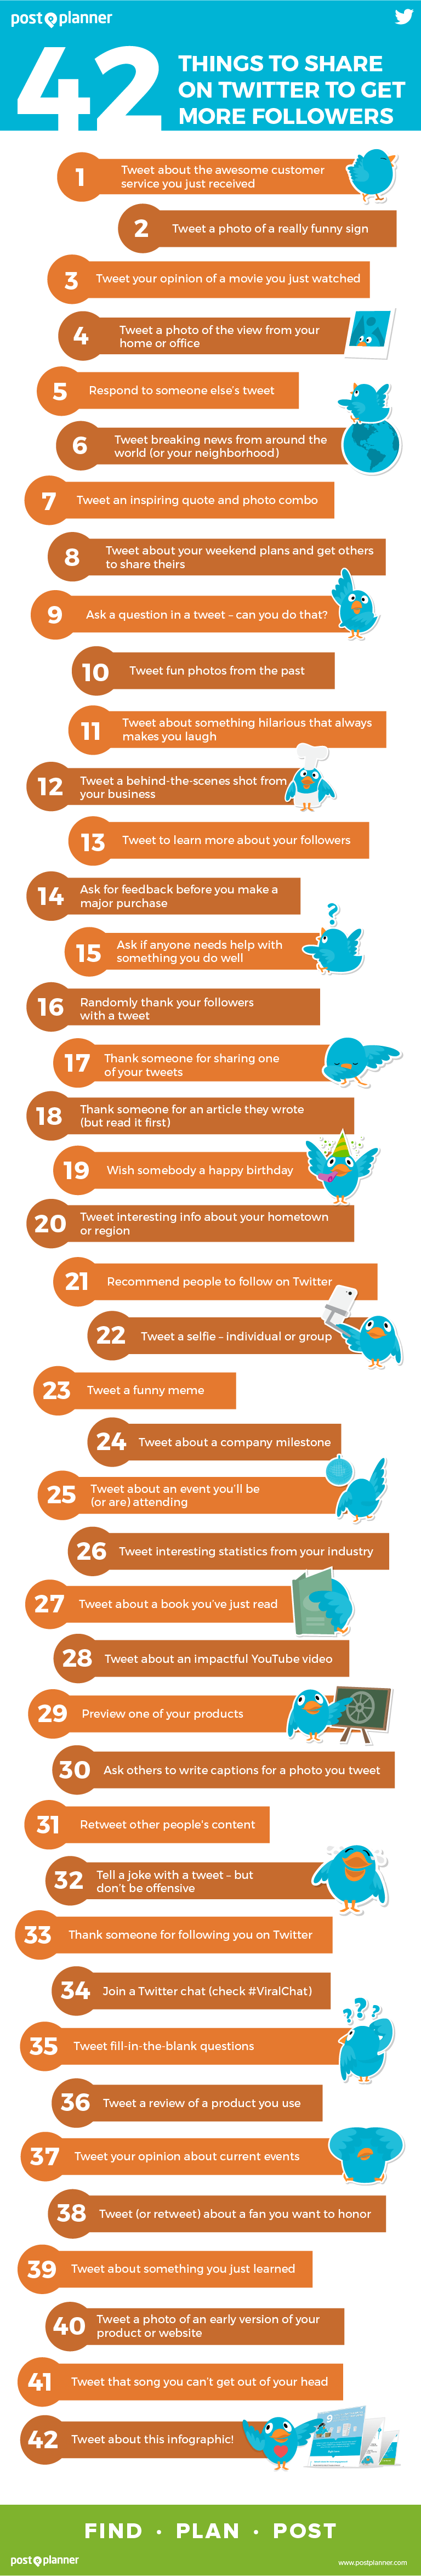 42 Things to Share on Twitter to Get More Followers - #Infographic